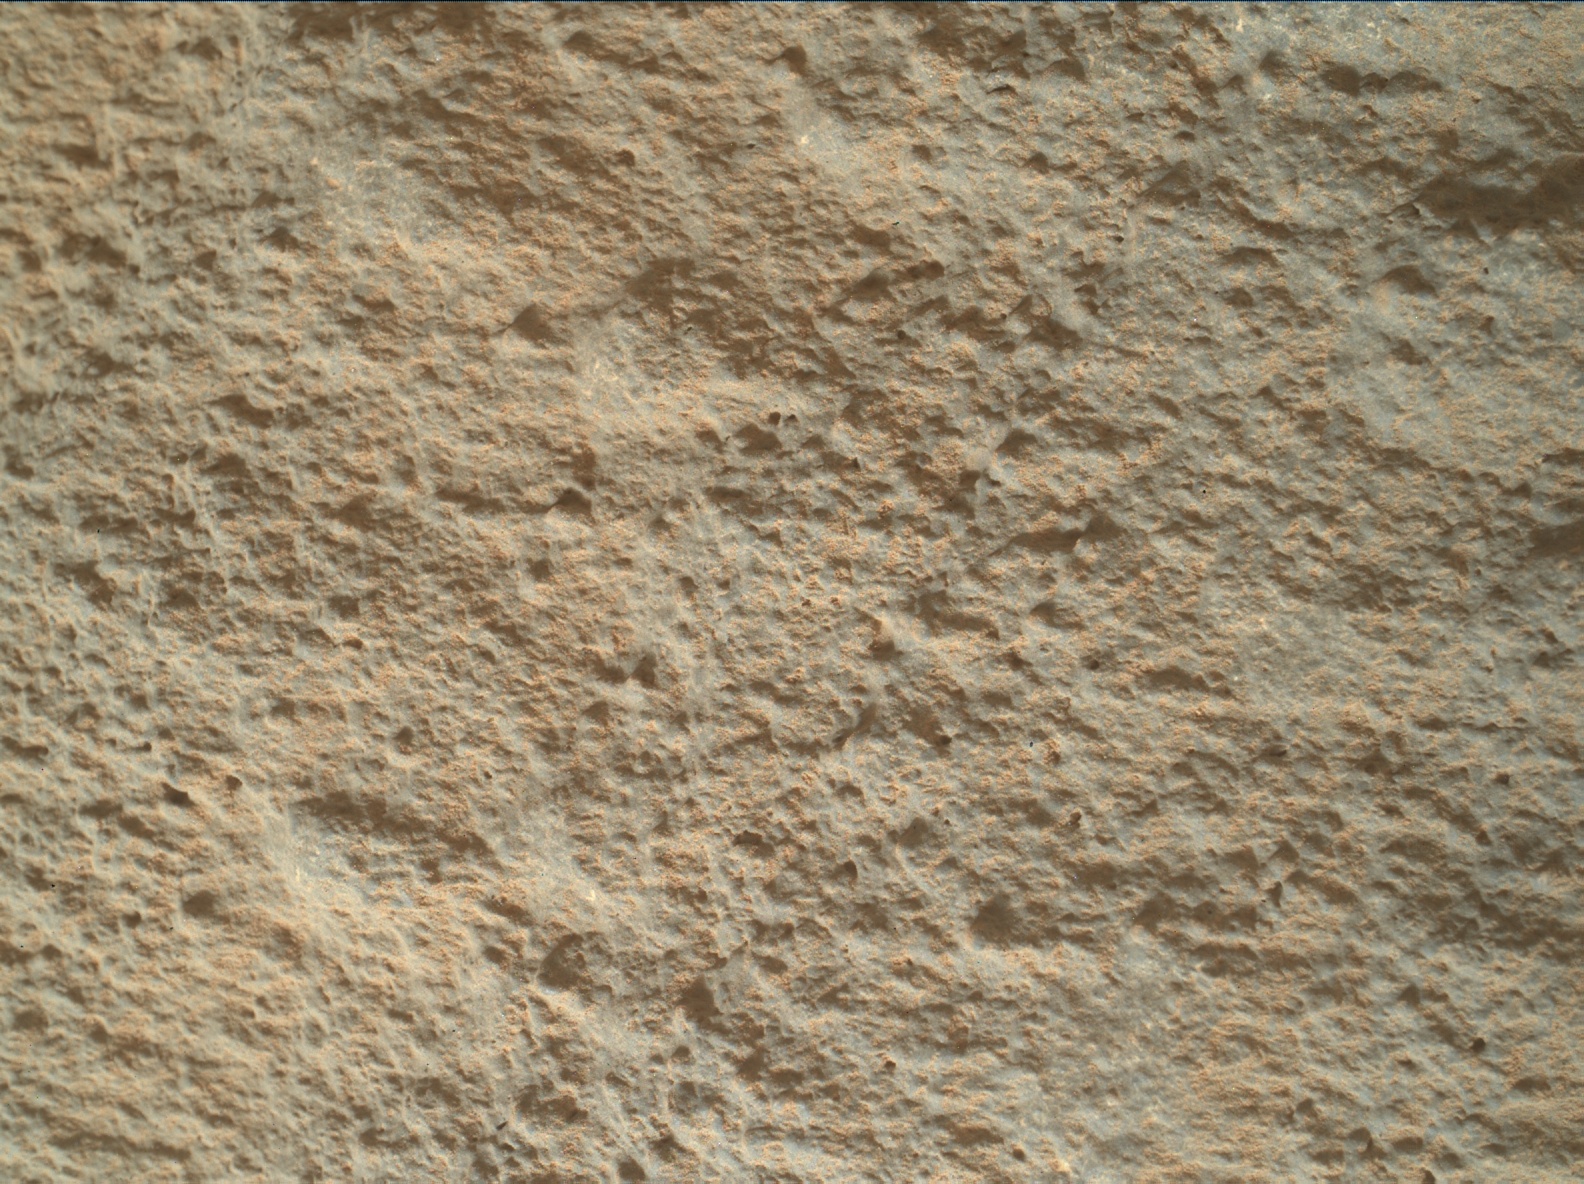 Nasa's Mars rover Curiosity acquired this image using its Mars Hand Lens Imager (MAHLI) on Sol 2699